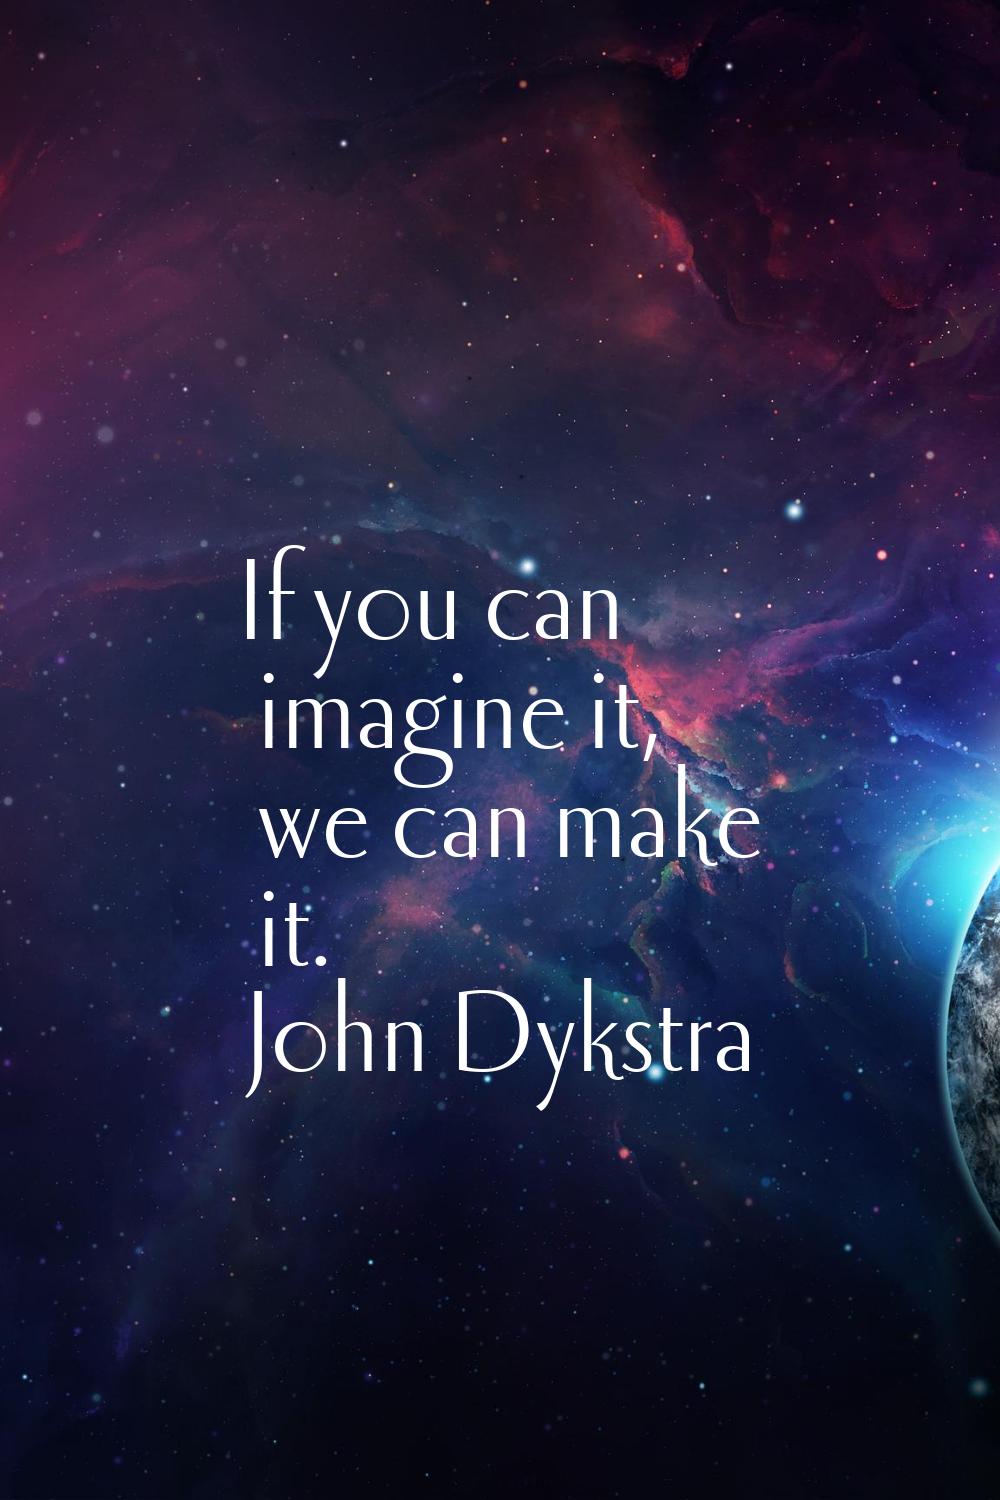 If you can imagine it, we can make it.